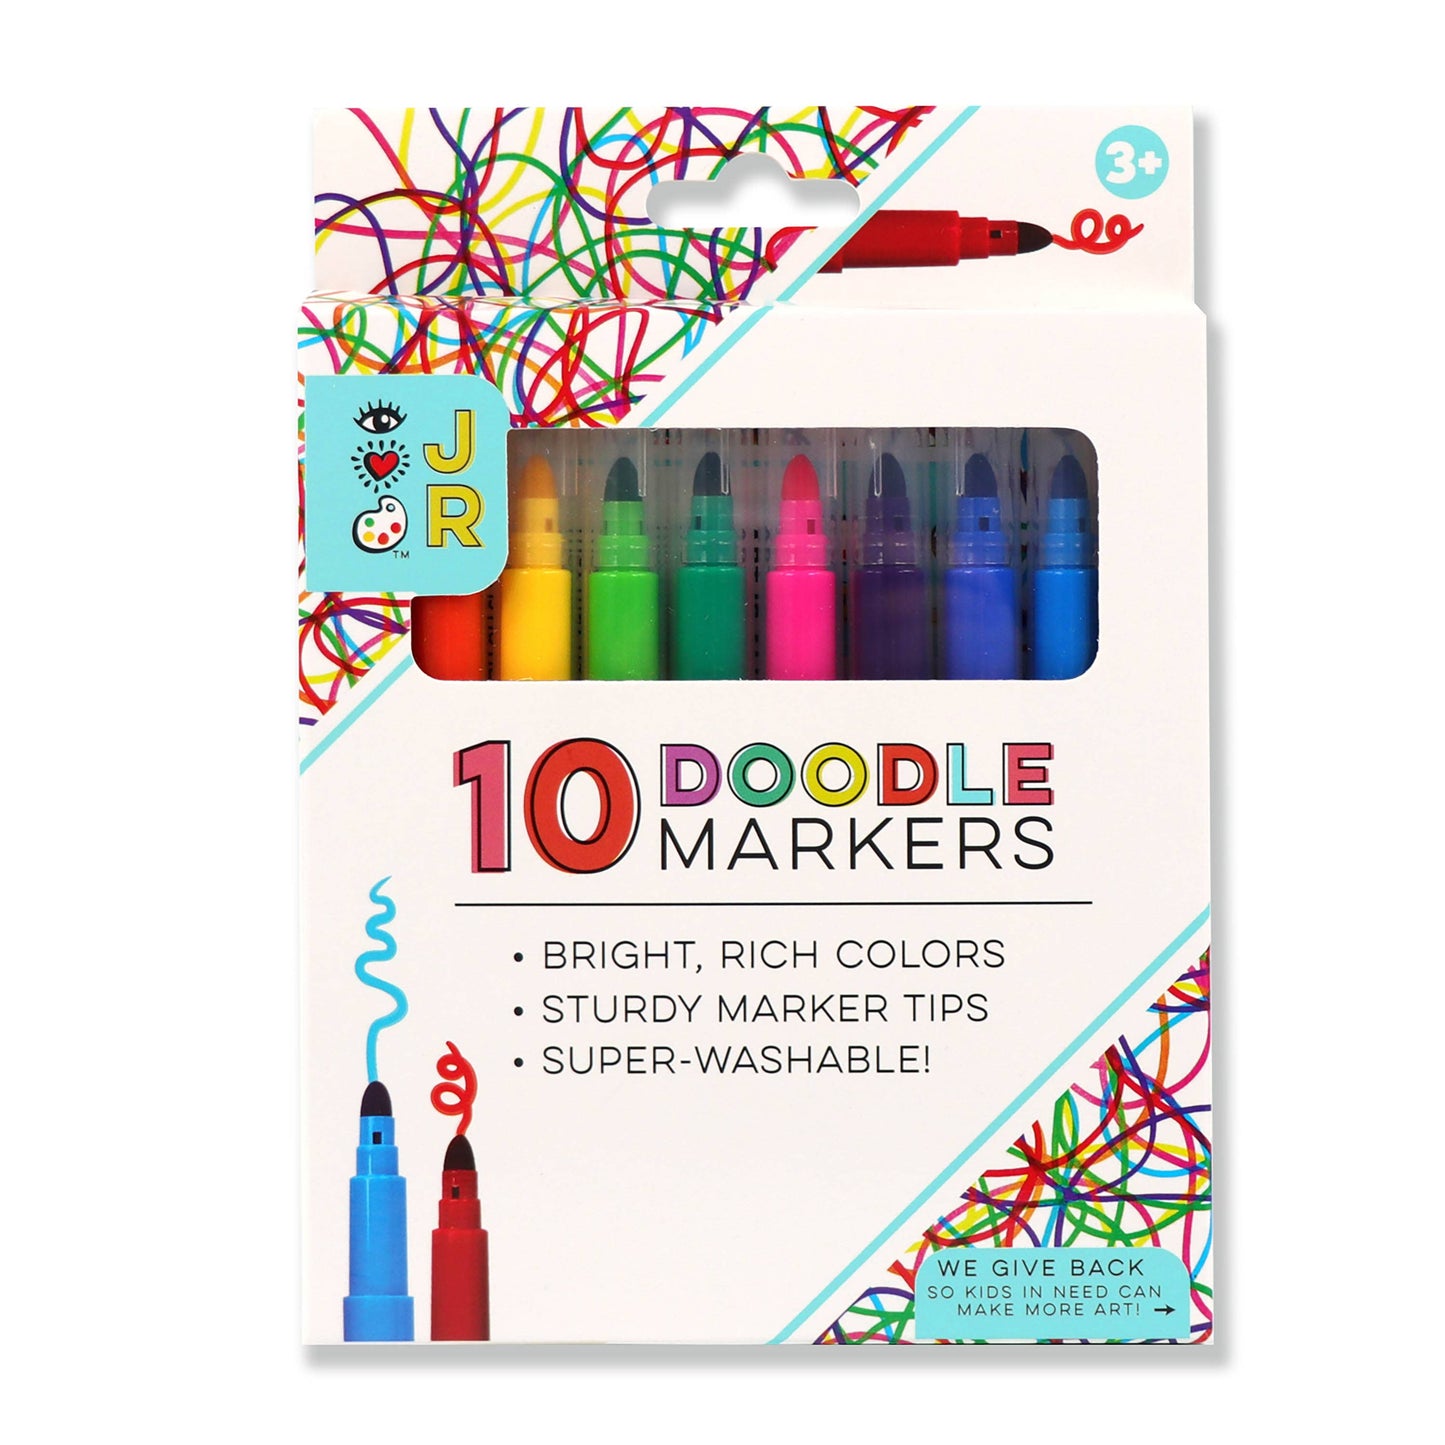 Doodle Markers